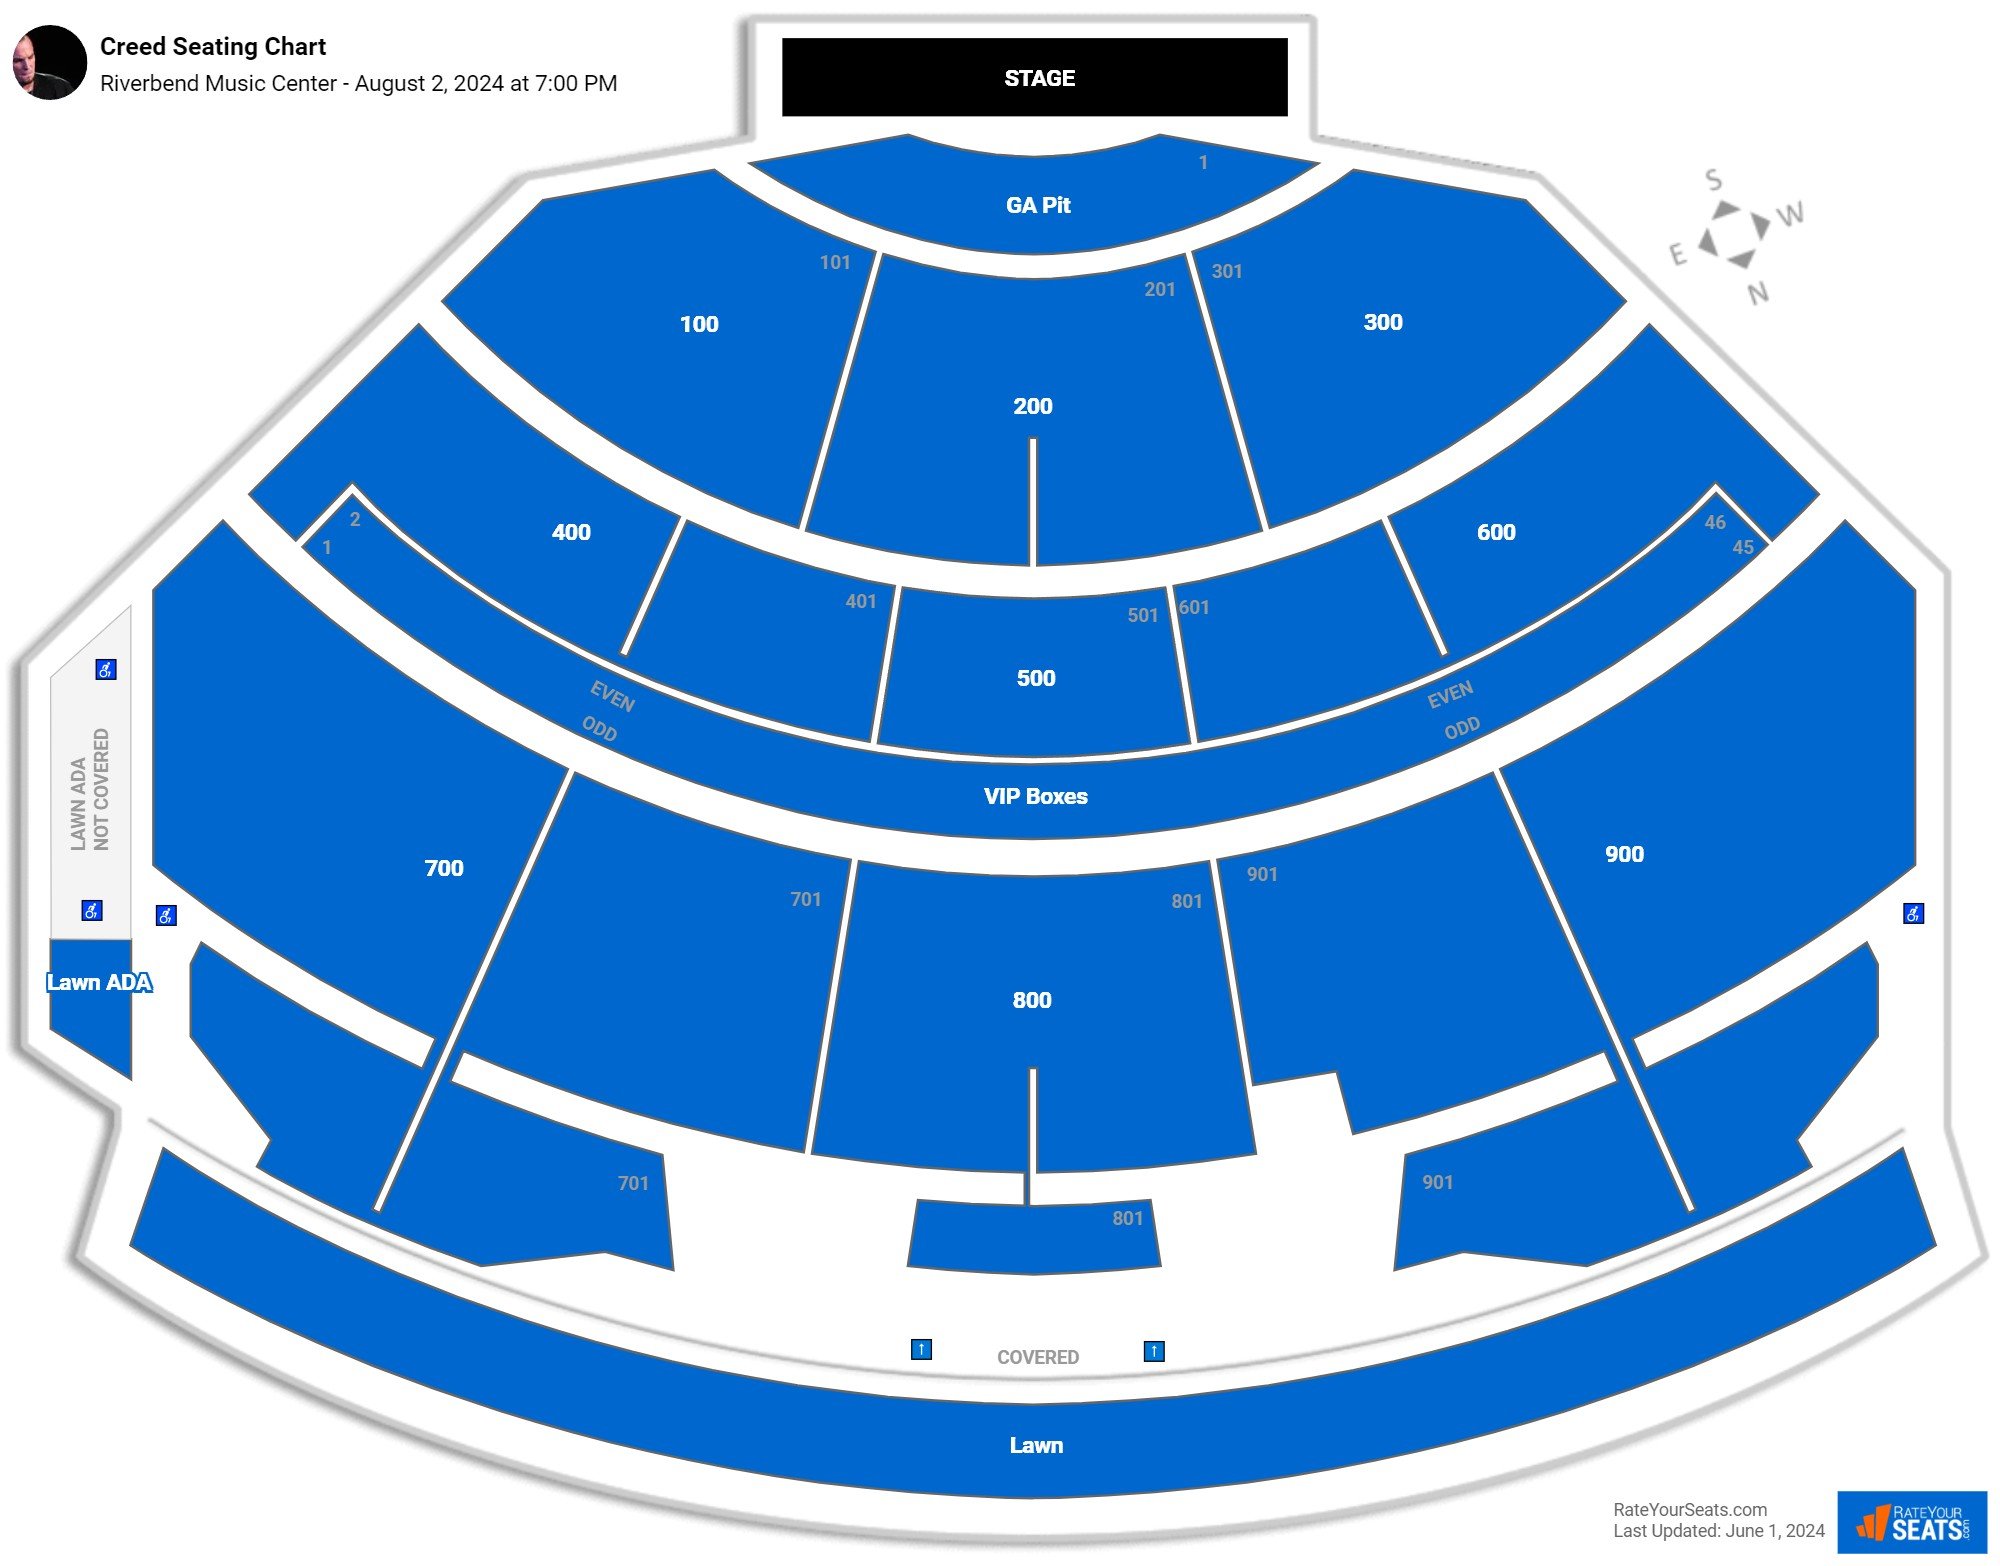 Riverbend Music Center Seating Chart - RateYourSeats.com